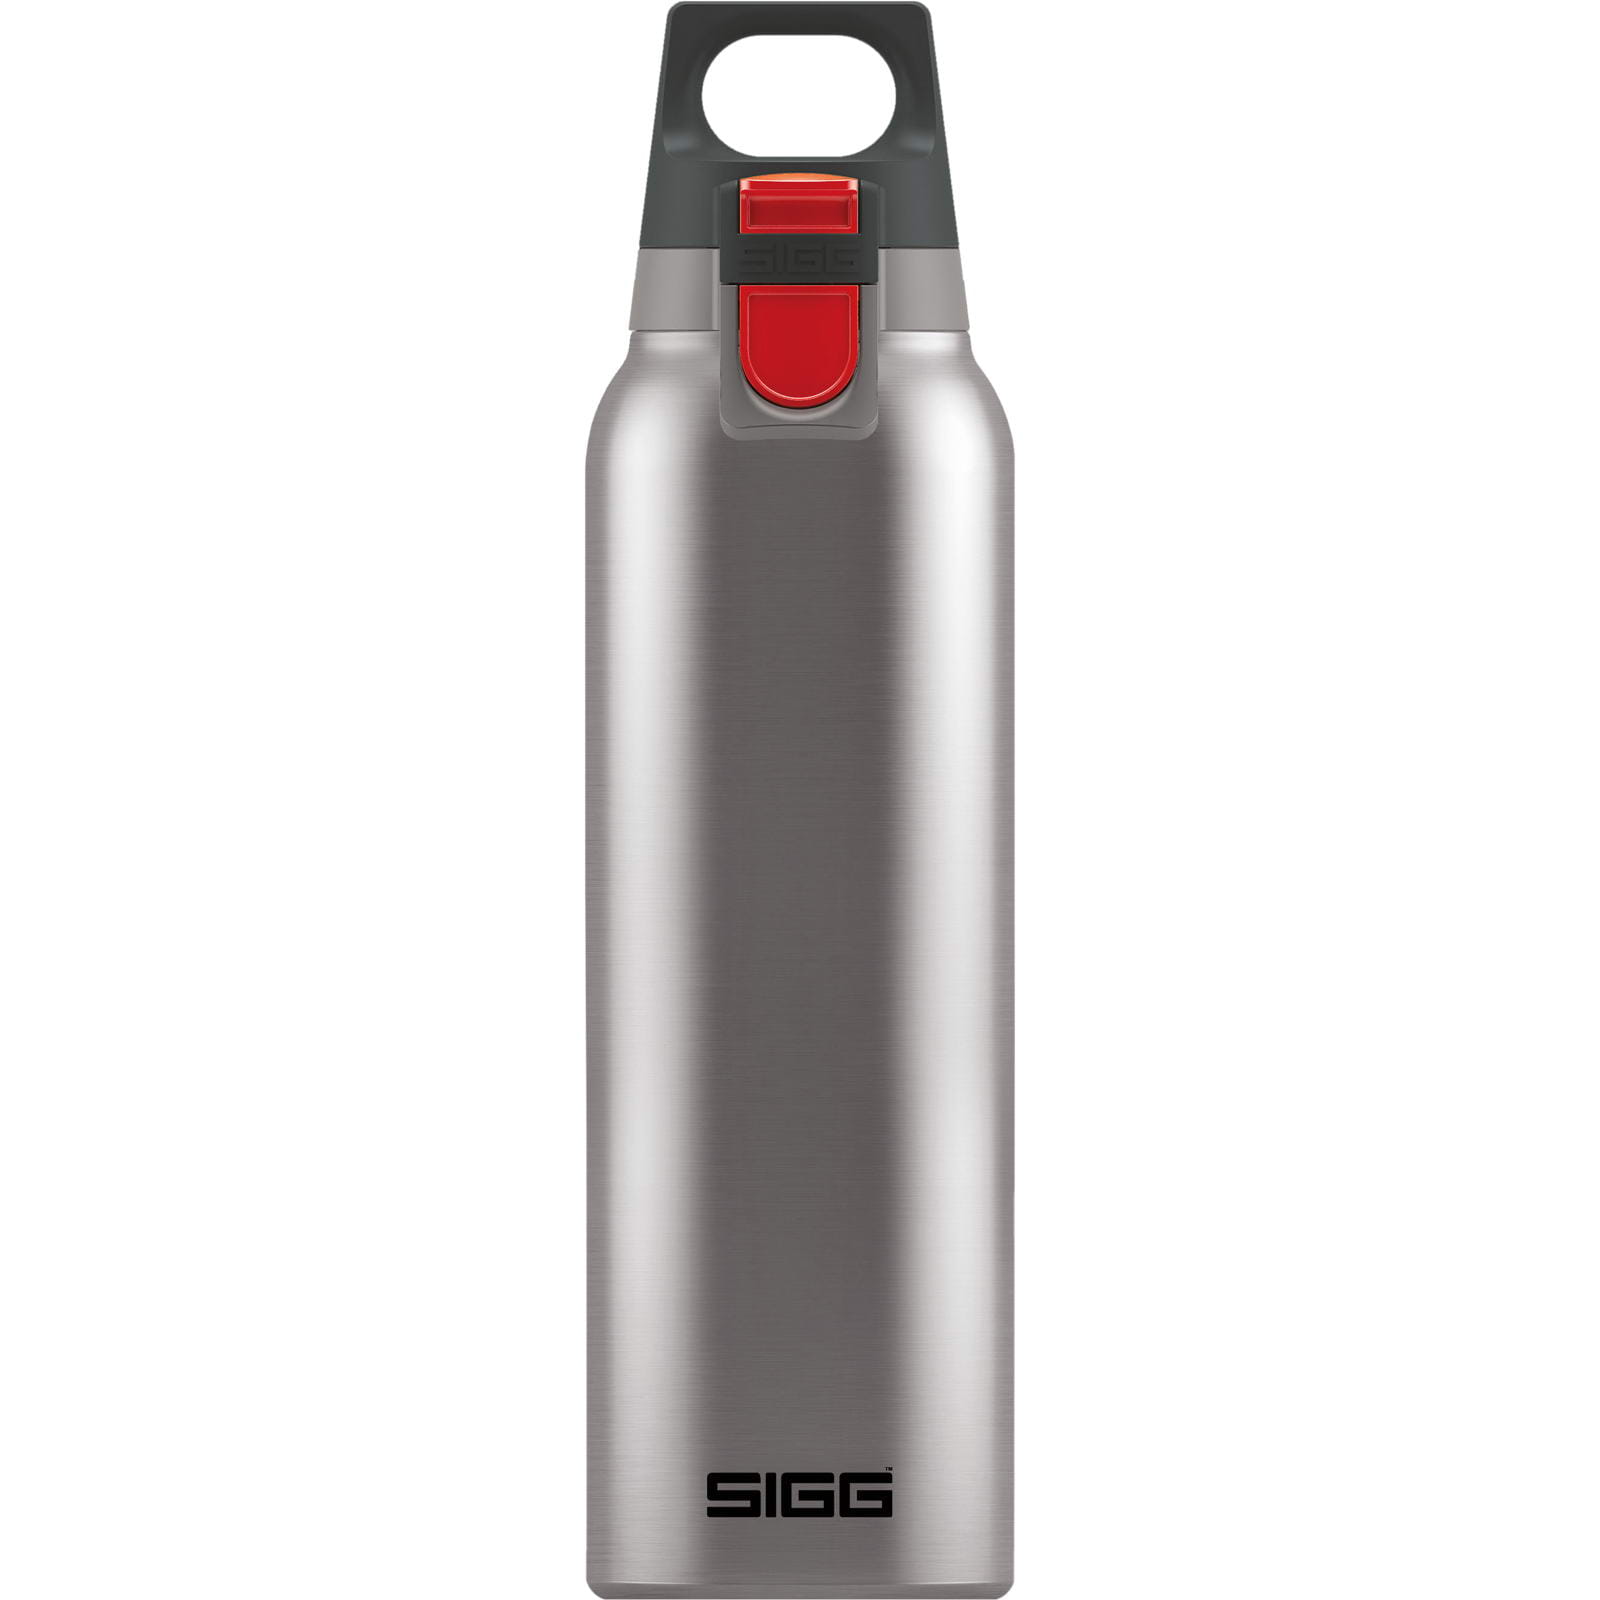 Sigg Hot & Cold One Light 0.55L - Thermoflasche online kaufen